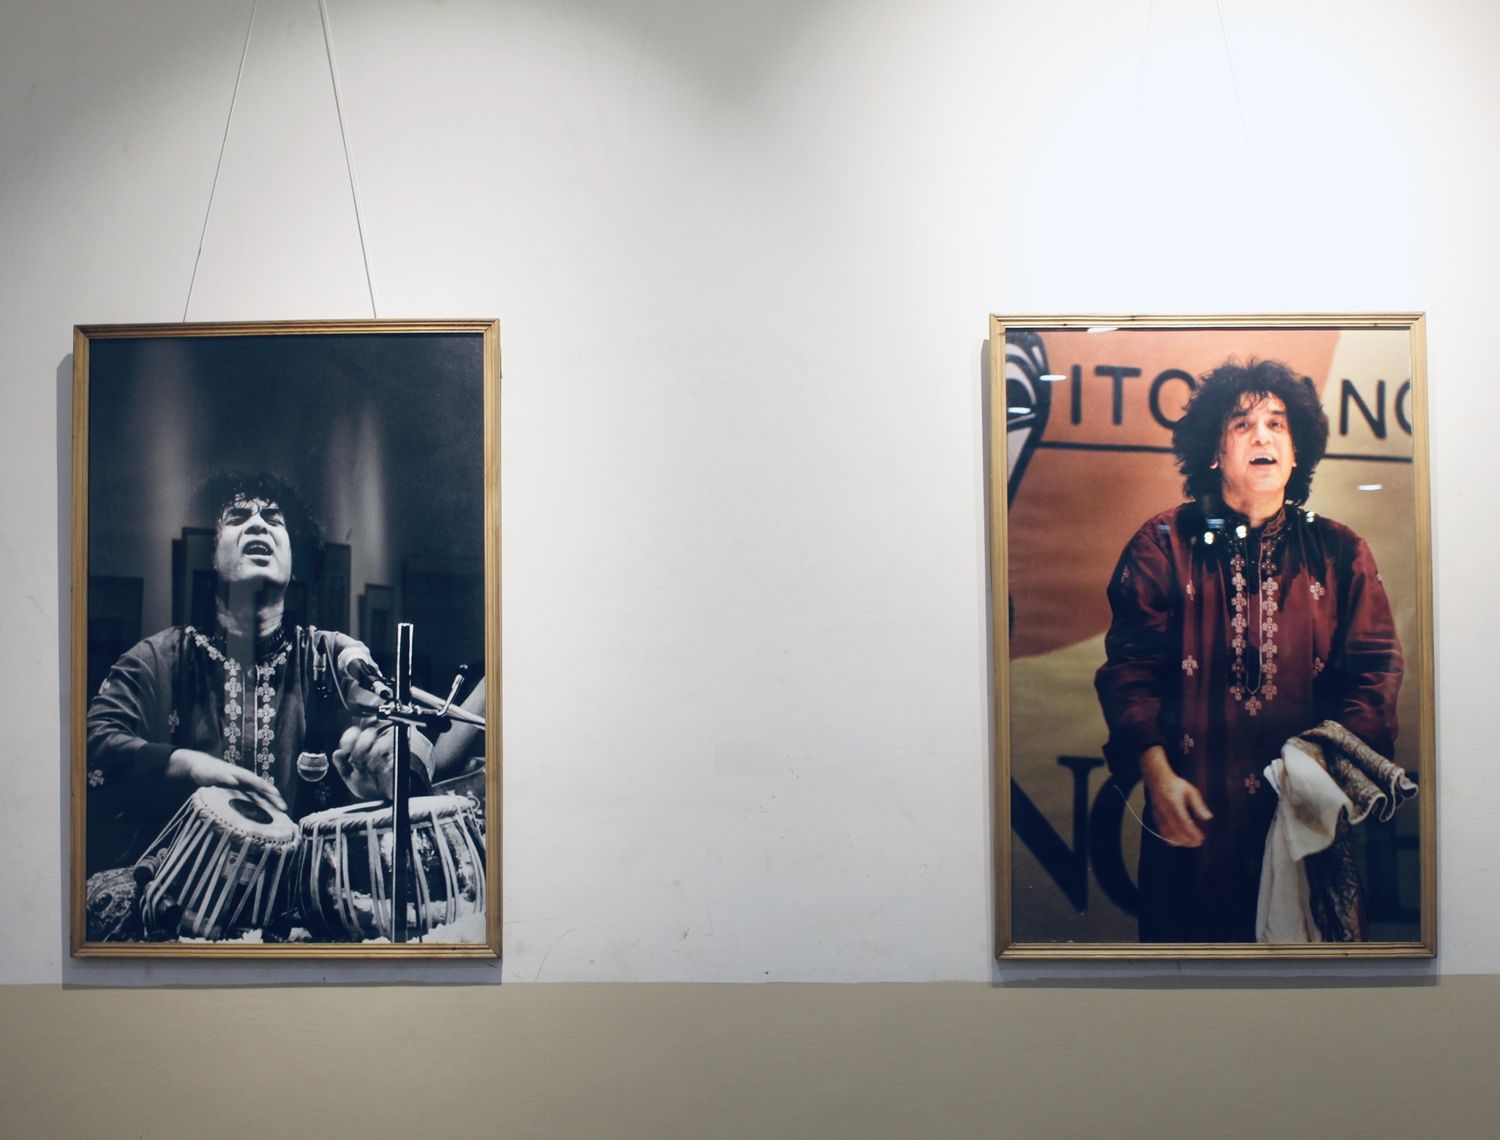 An exhibition gallery showing Zakir Hussain's photographs